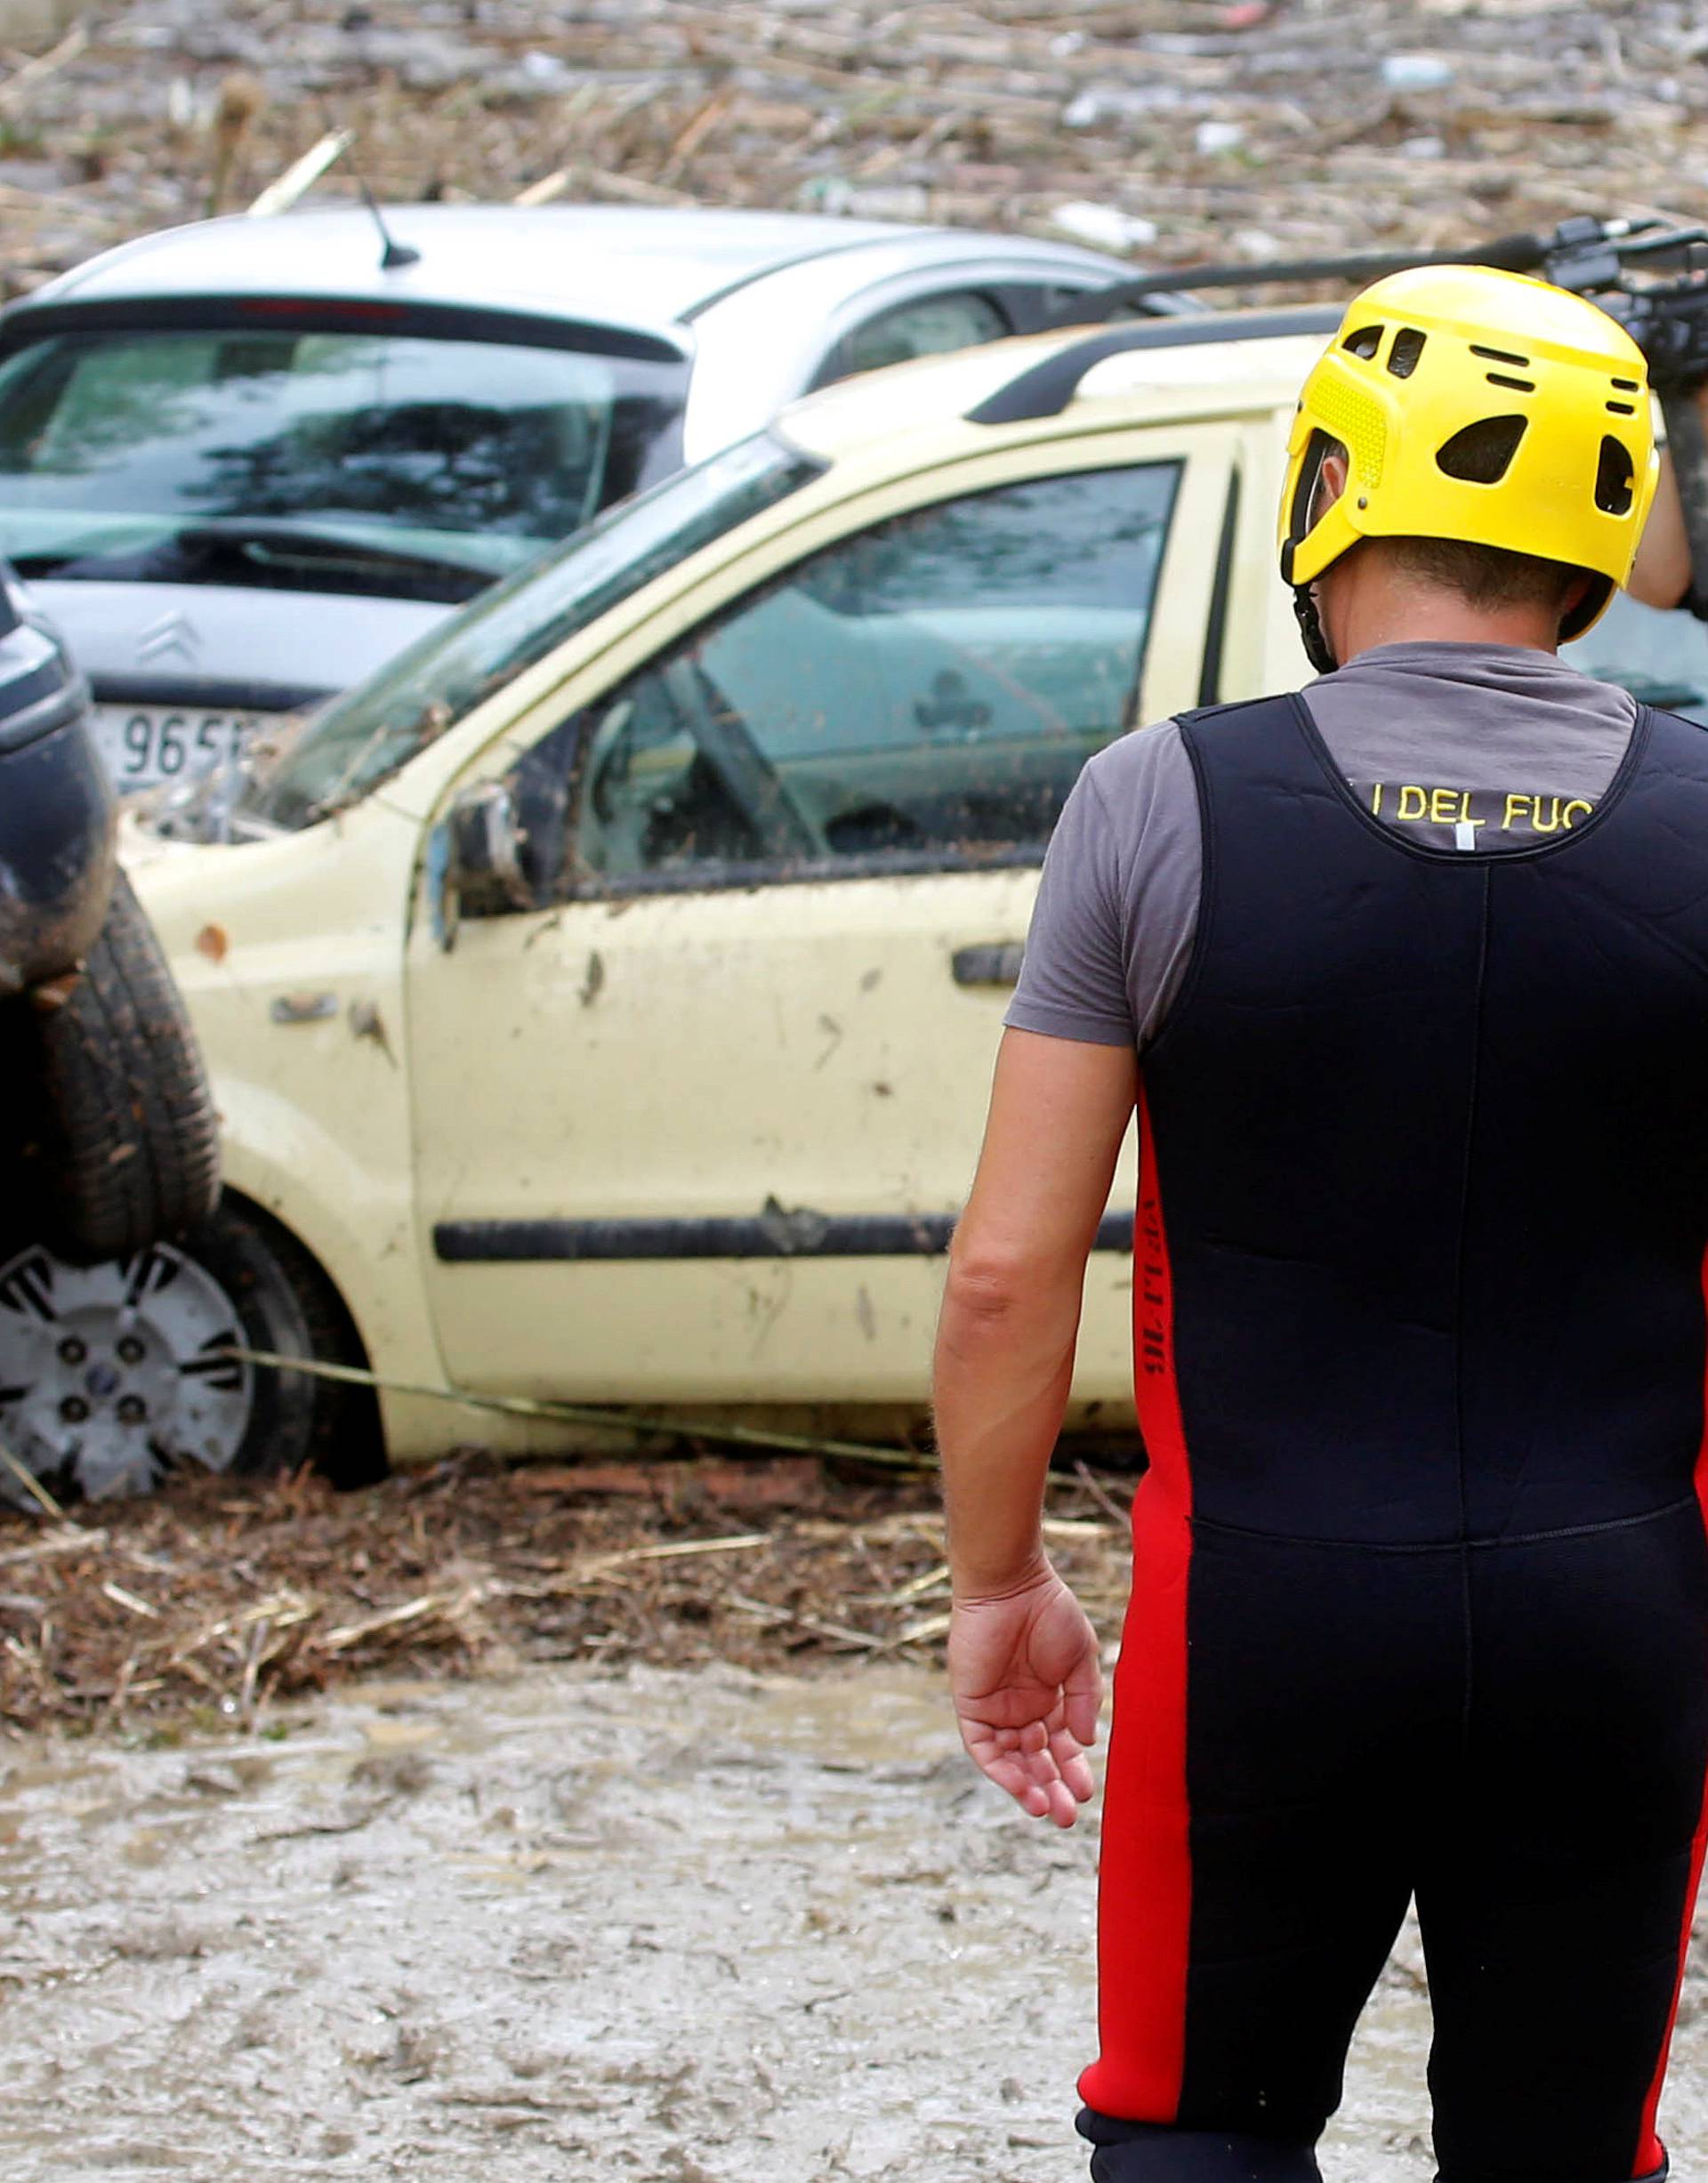 Damaged cars are seen following floods in Livorno